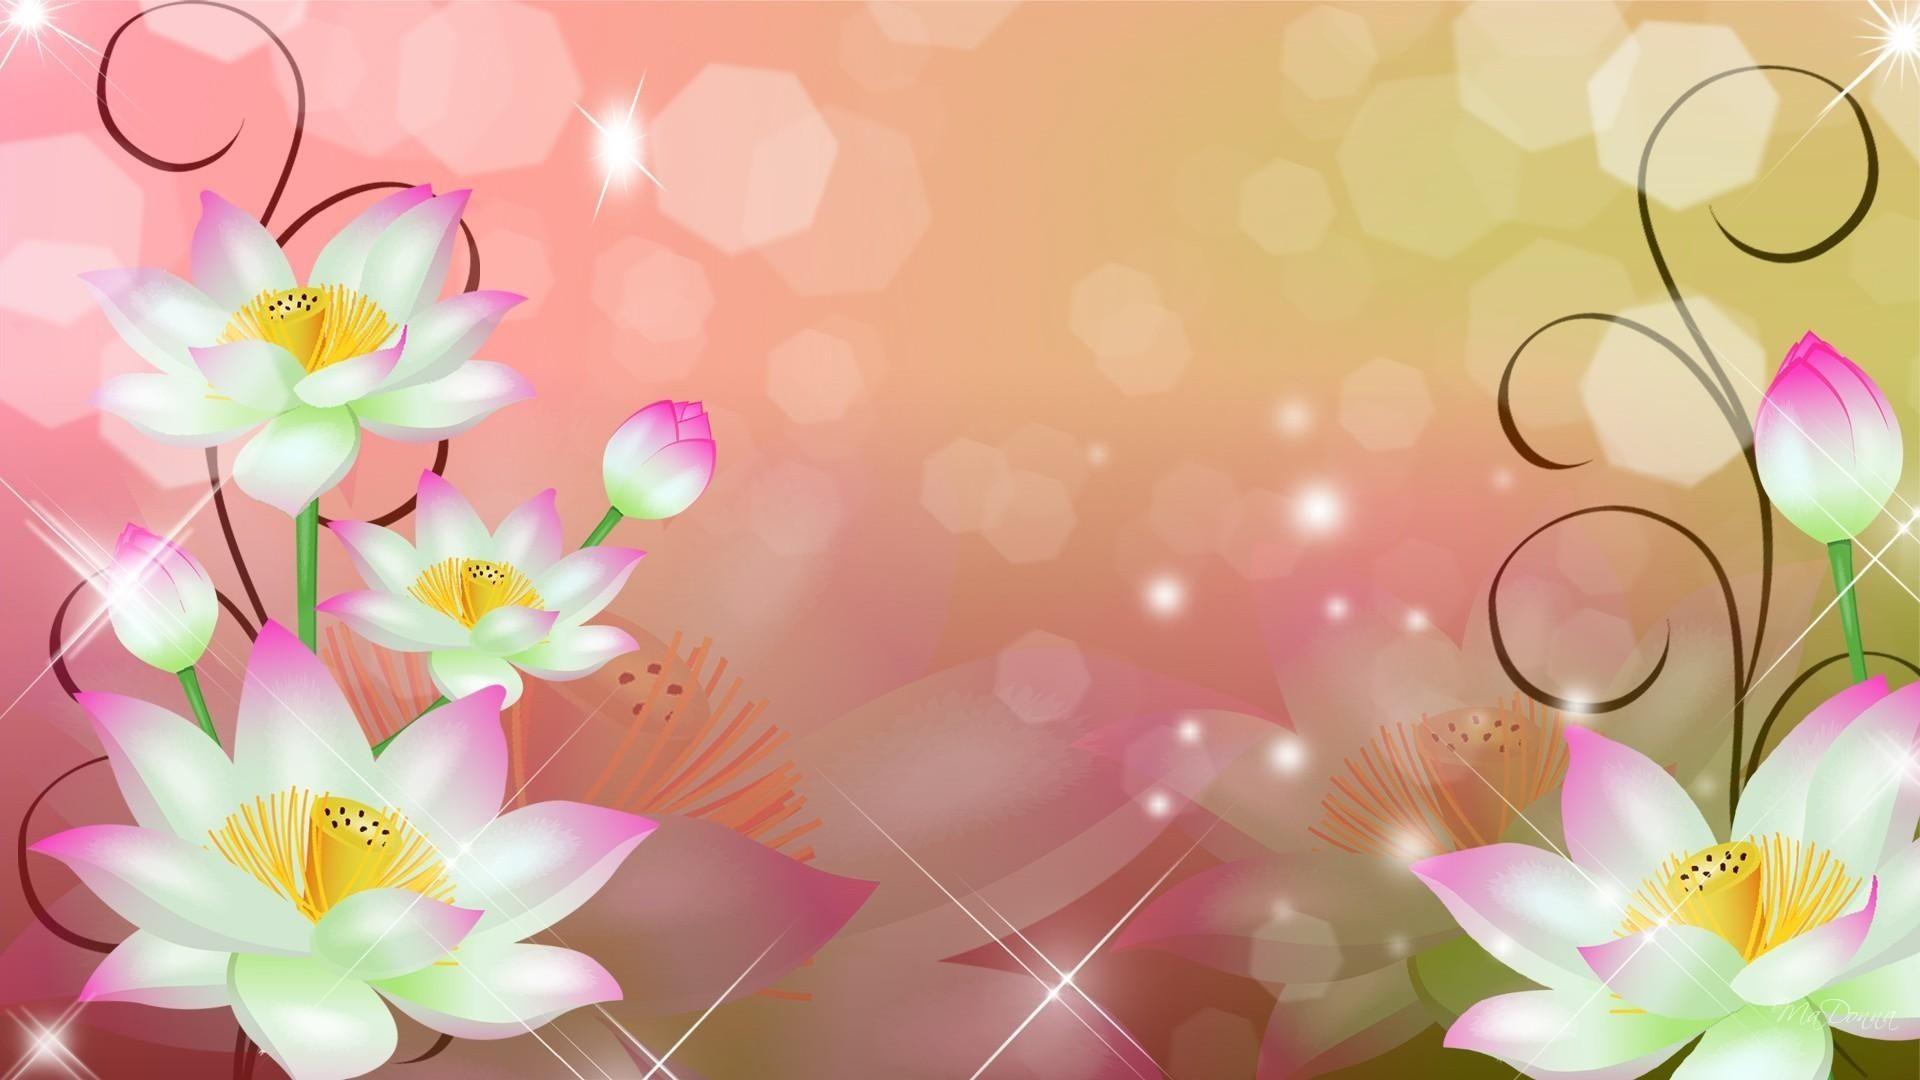 Backgrounds Image Flowers - Wallpaper Cave